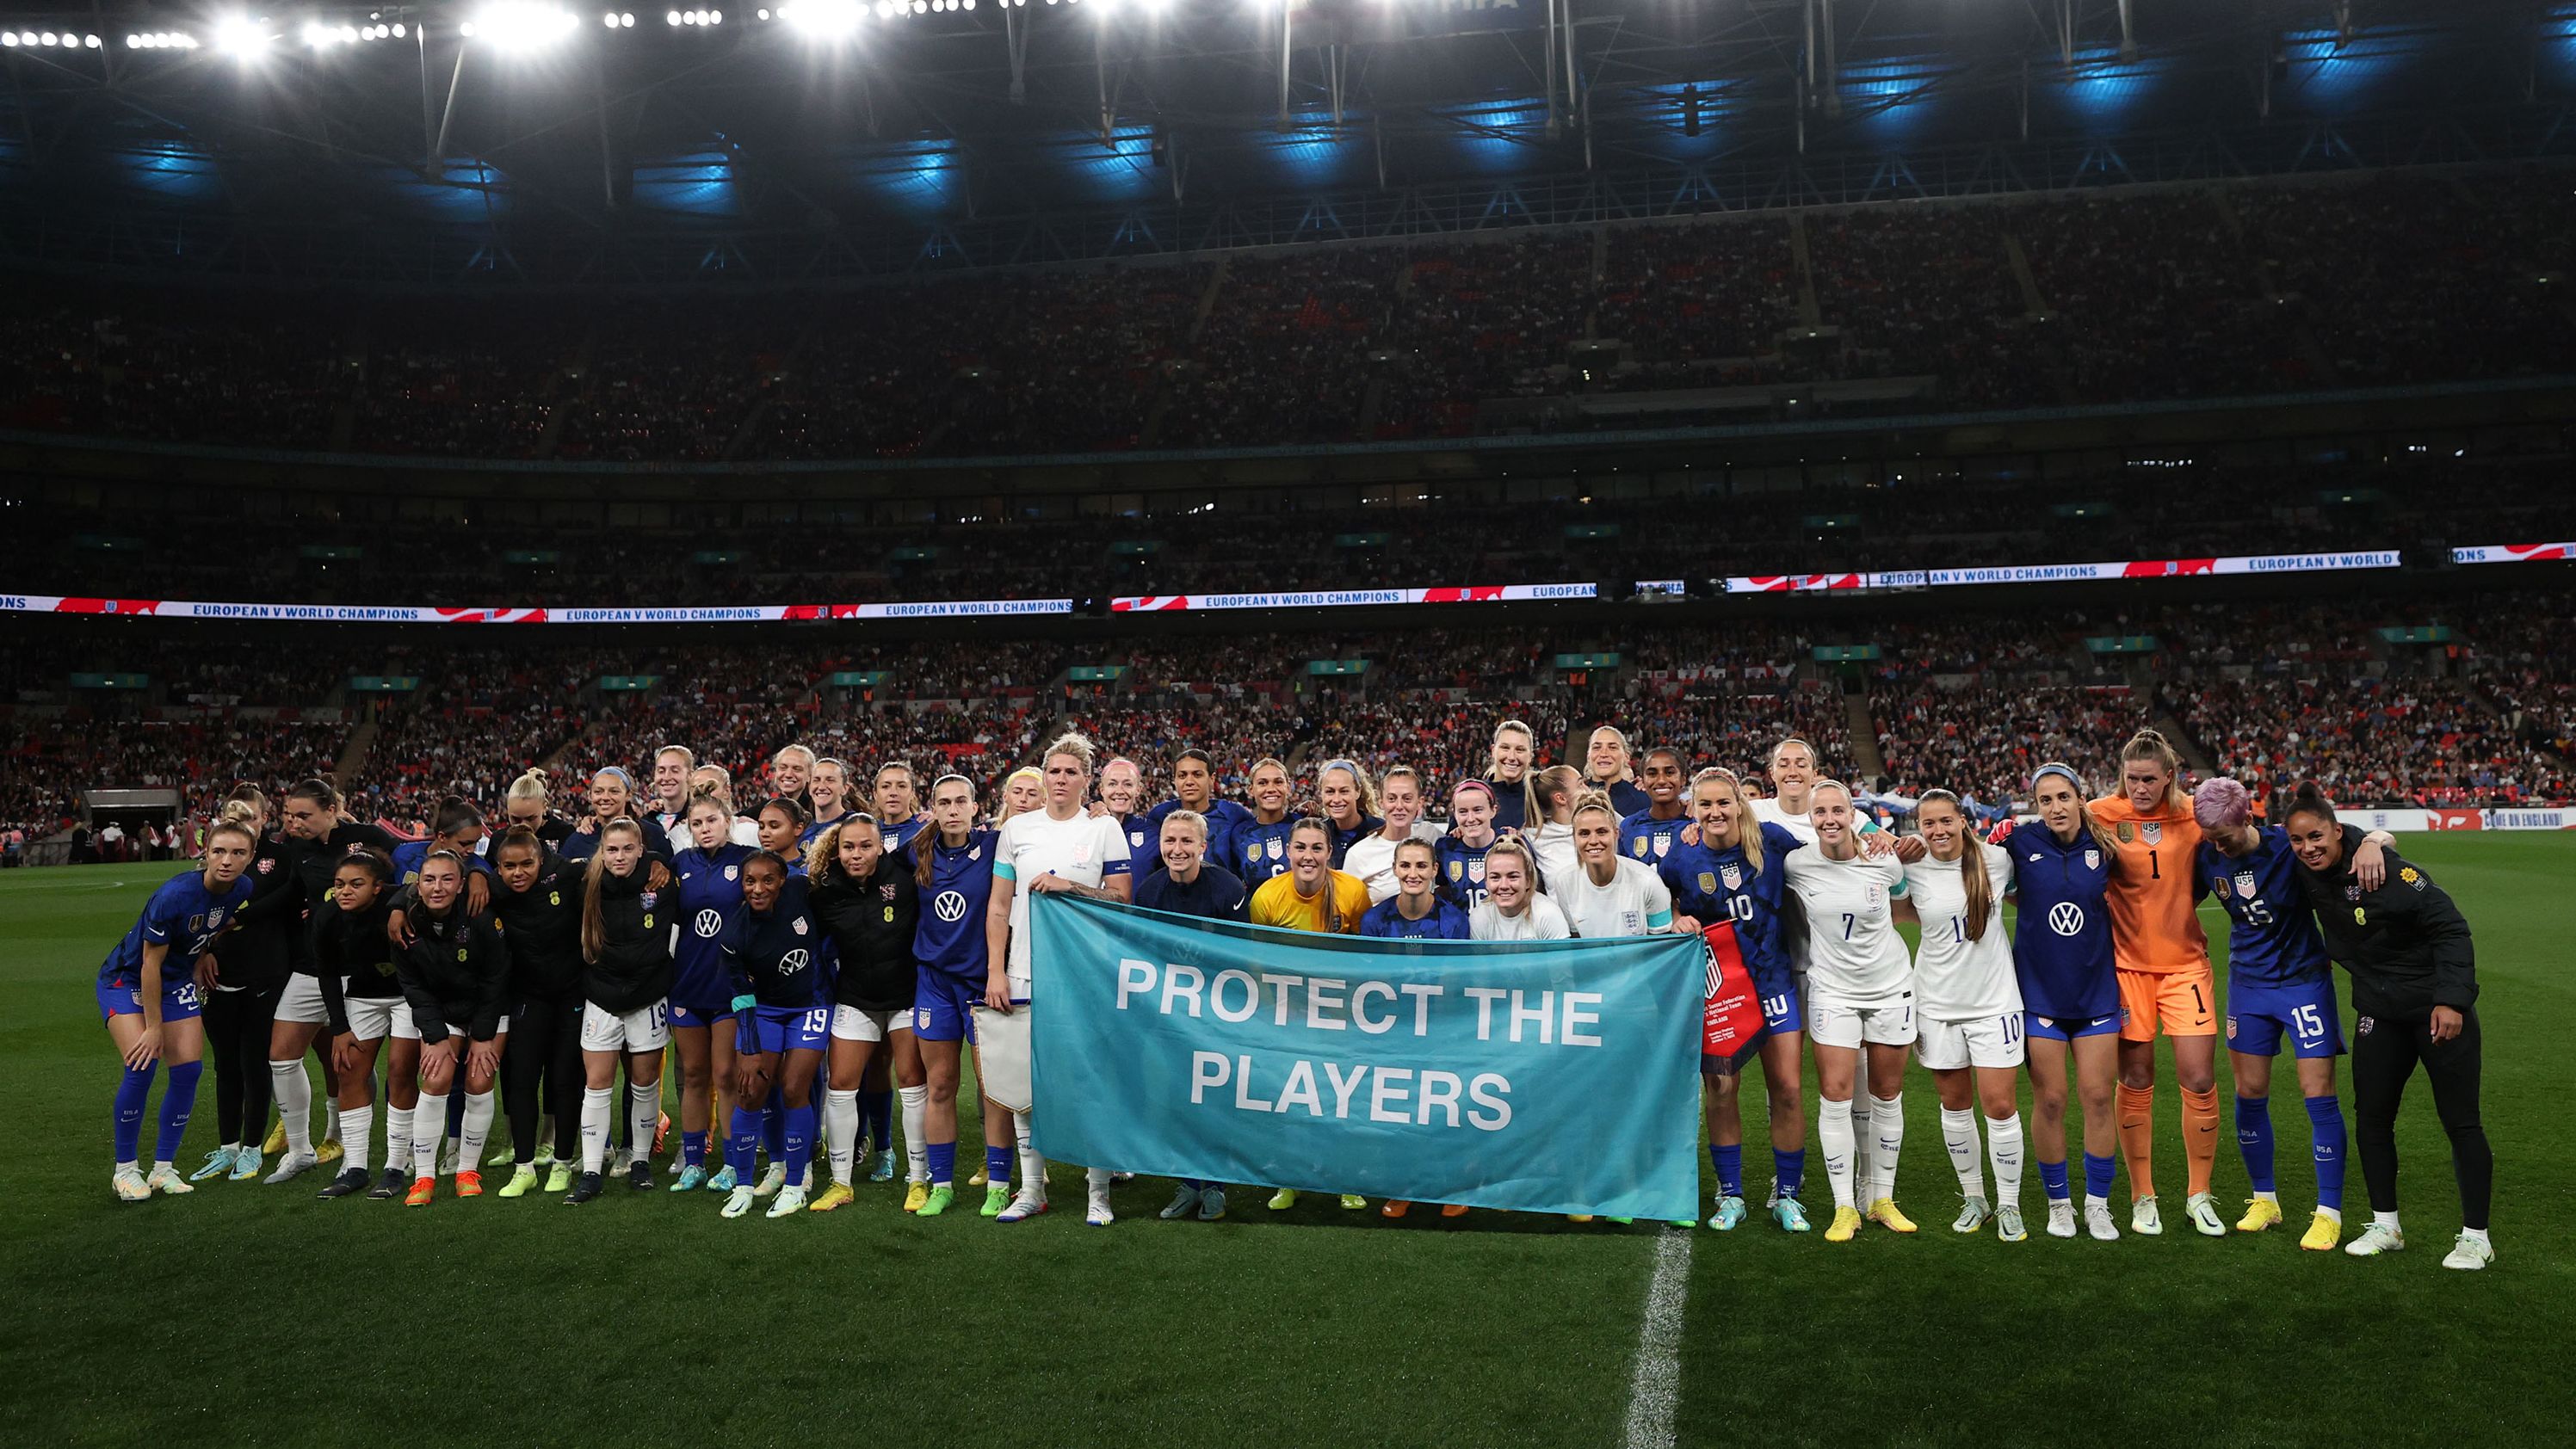 England and USWNT showed support for victims of abuse before the match. 